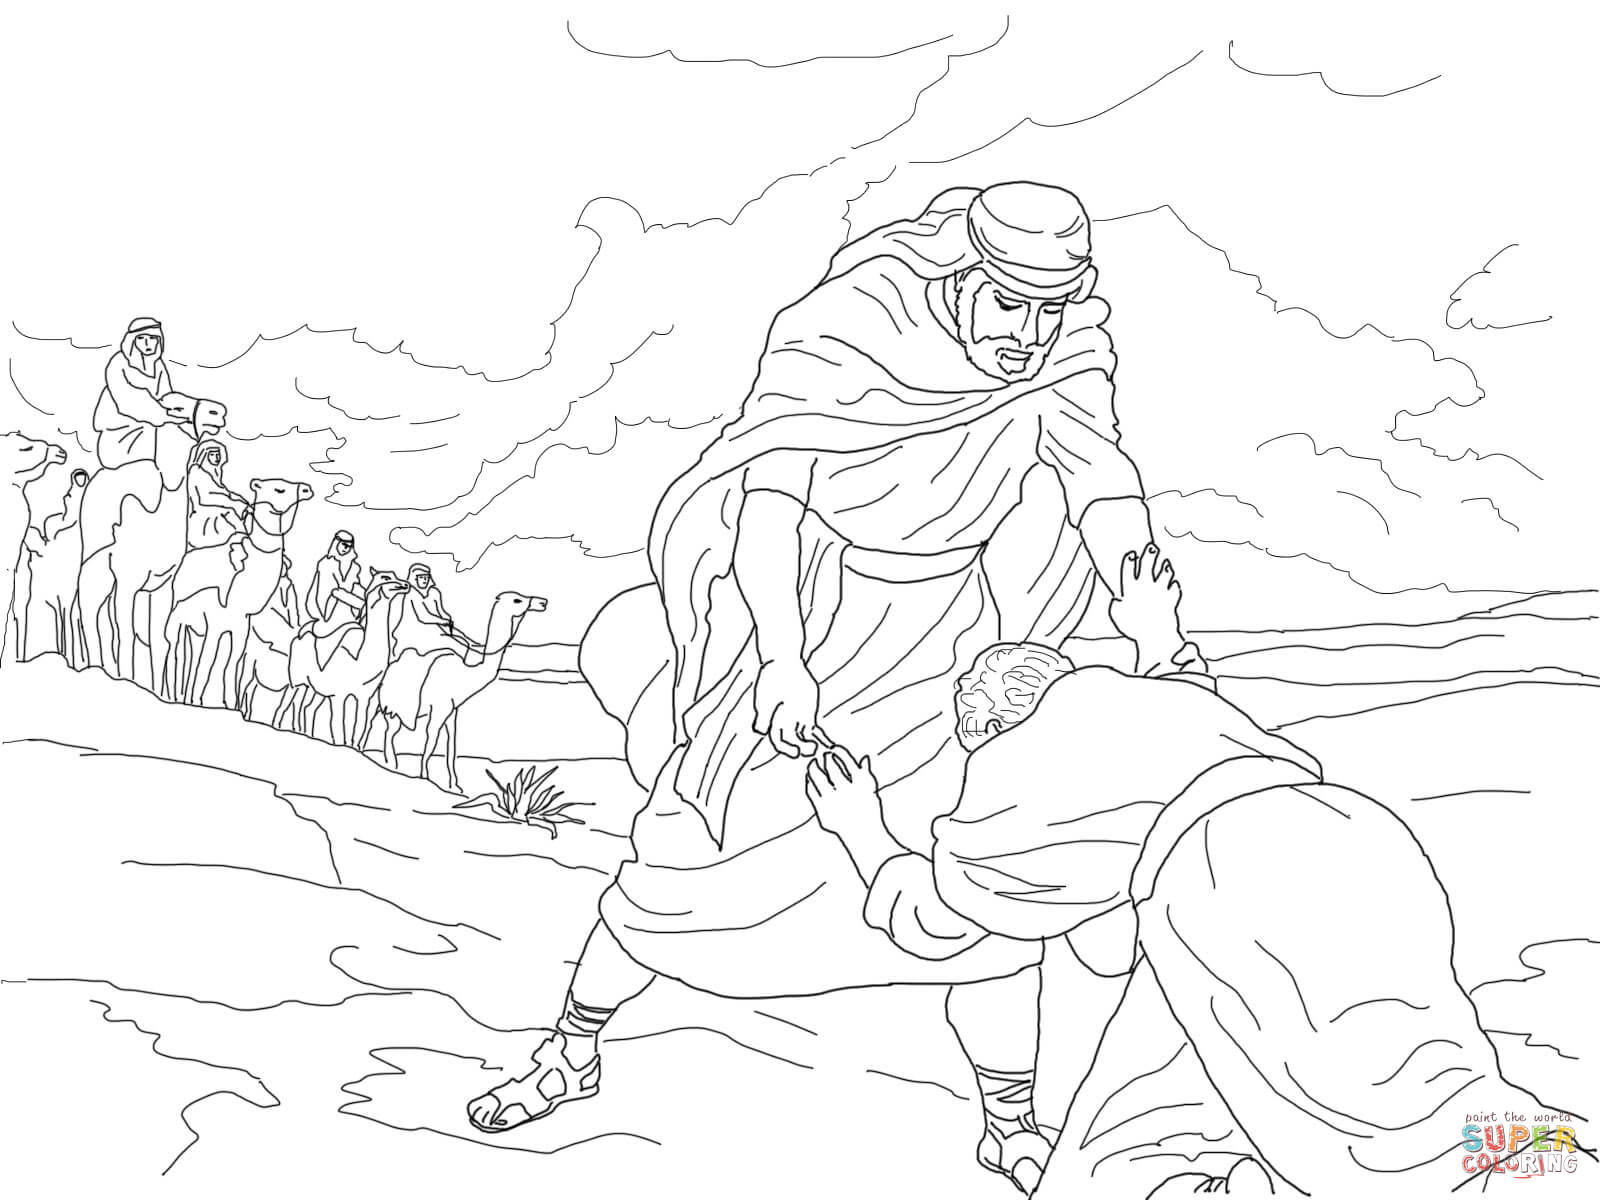 Esau Forgives Jacob coloring page | Free Printable Coloring Pages